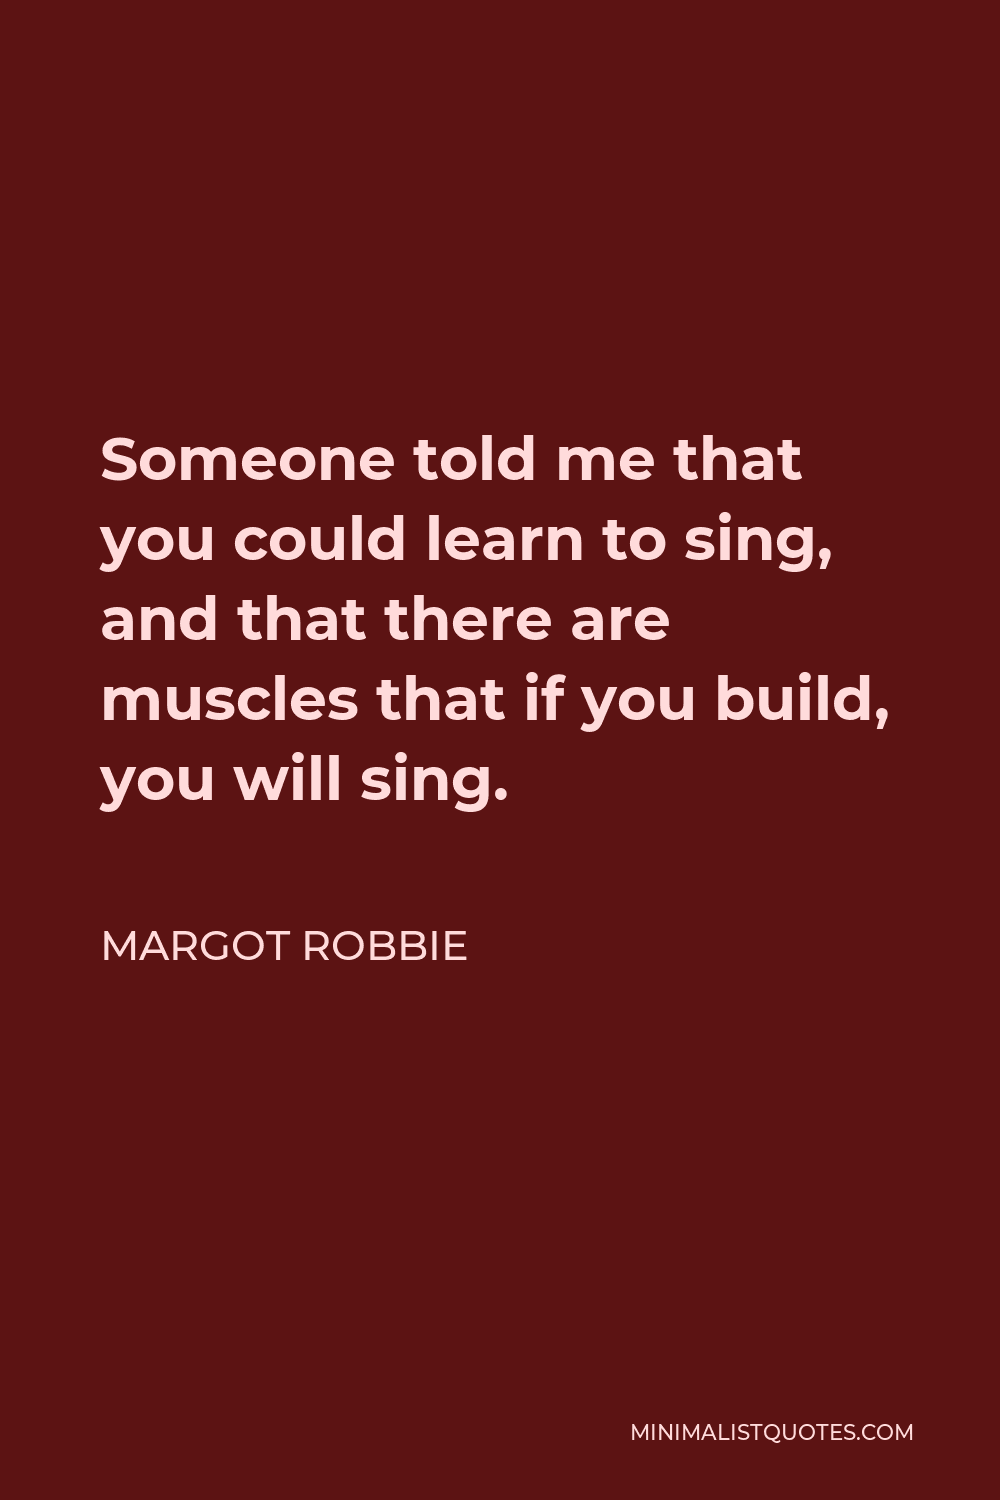 Margot Robbie Quote - Someone told me that you could learn to sing, and that there are muscles that if you build, you will sing.